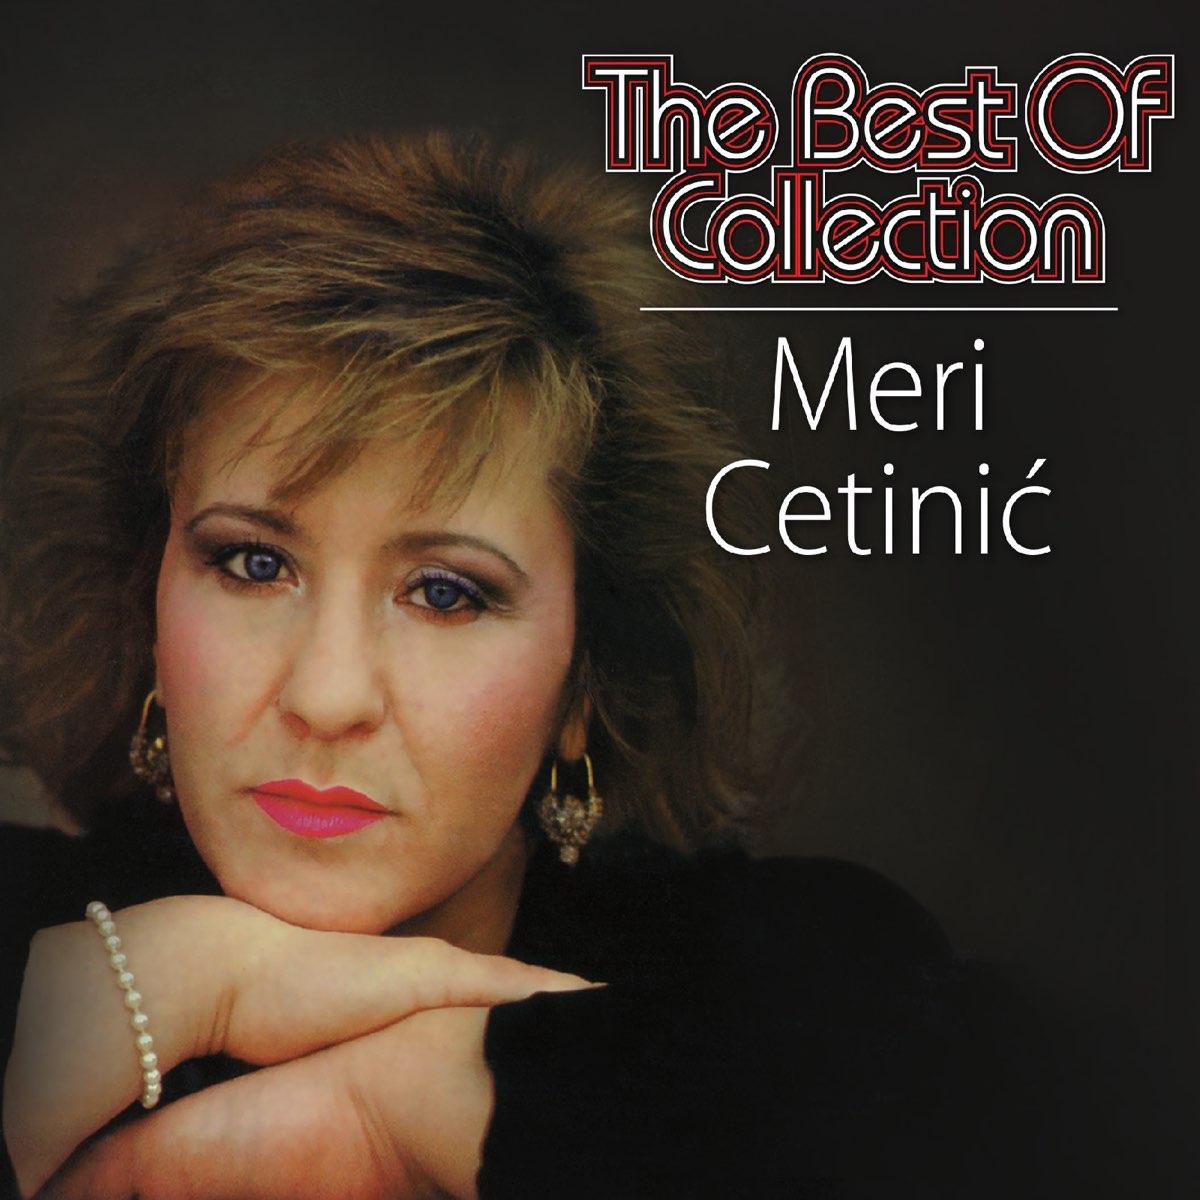 MERI CETINIĆ - The Best Of Collection